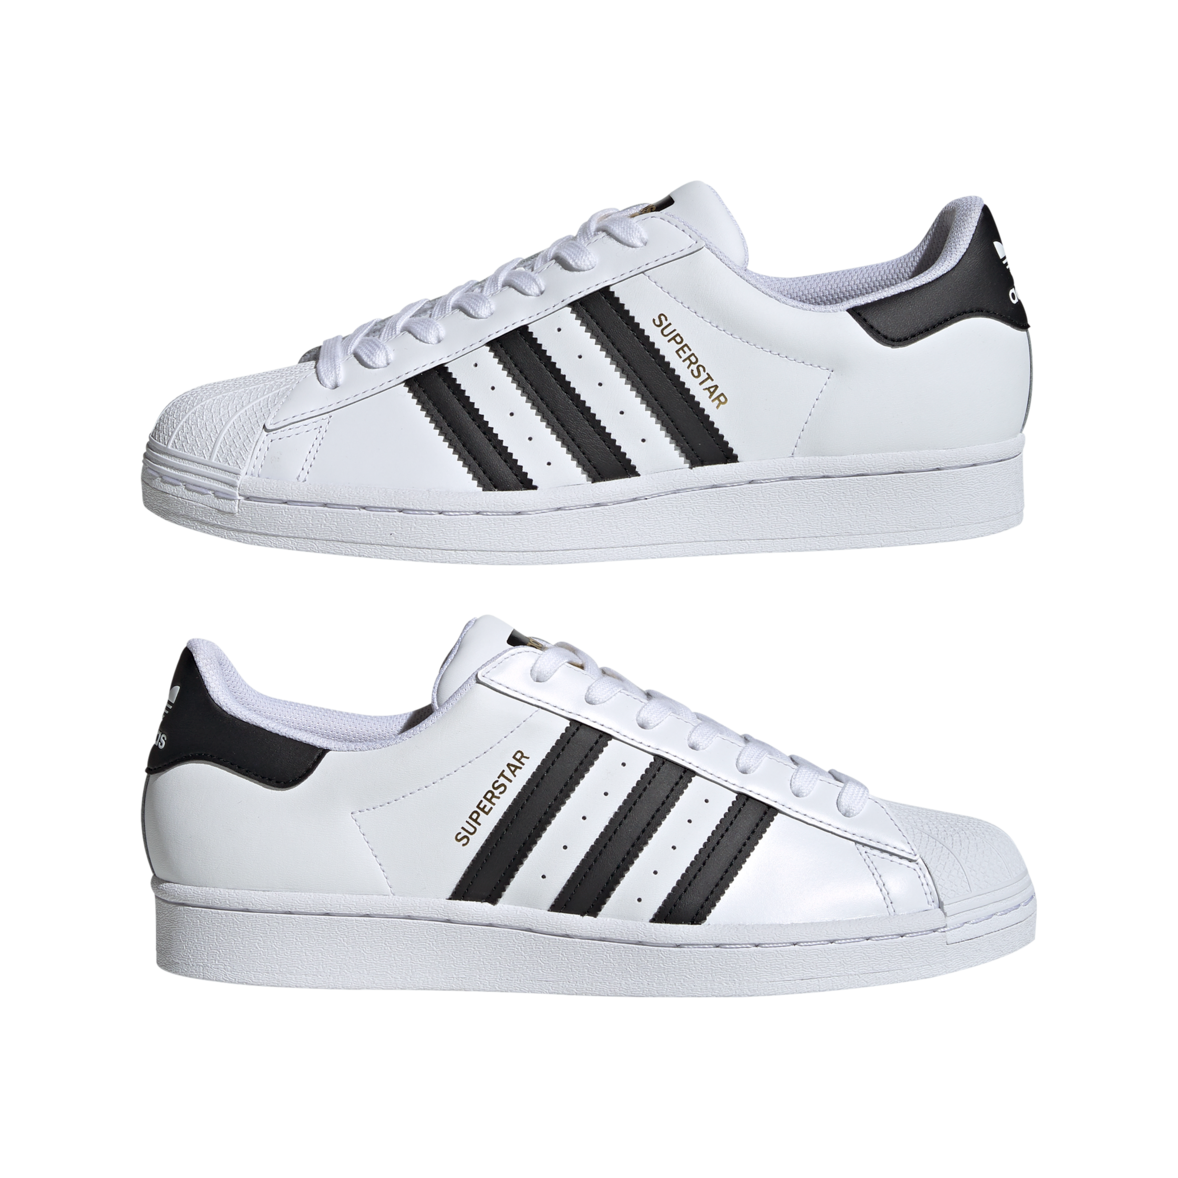 adidas Superstar LACES STORE